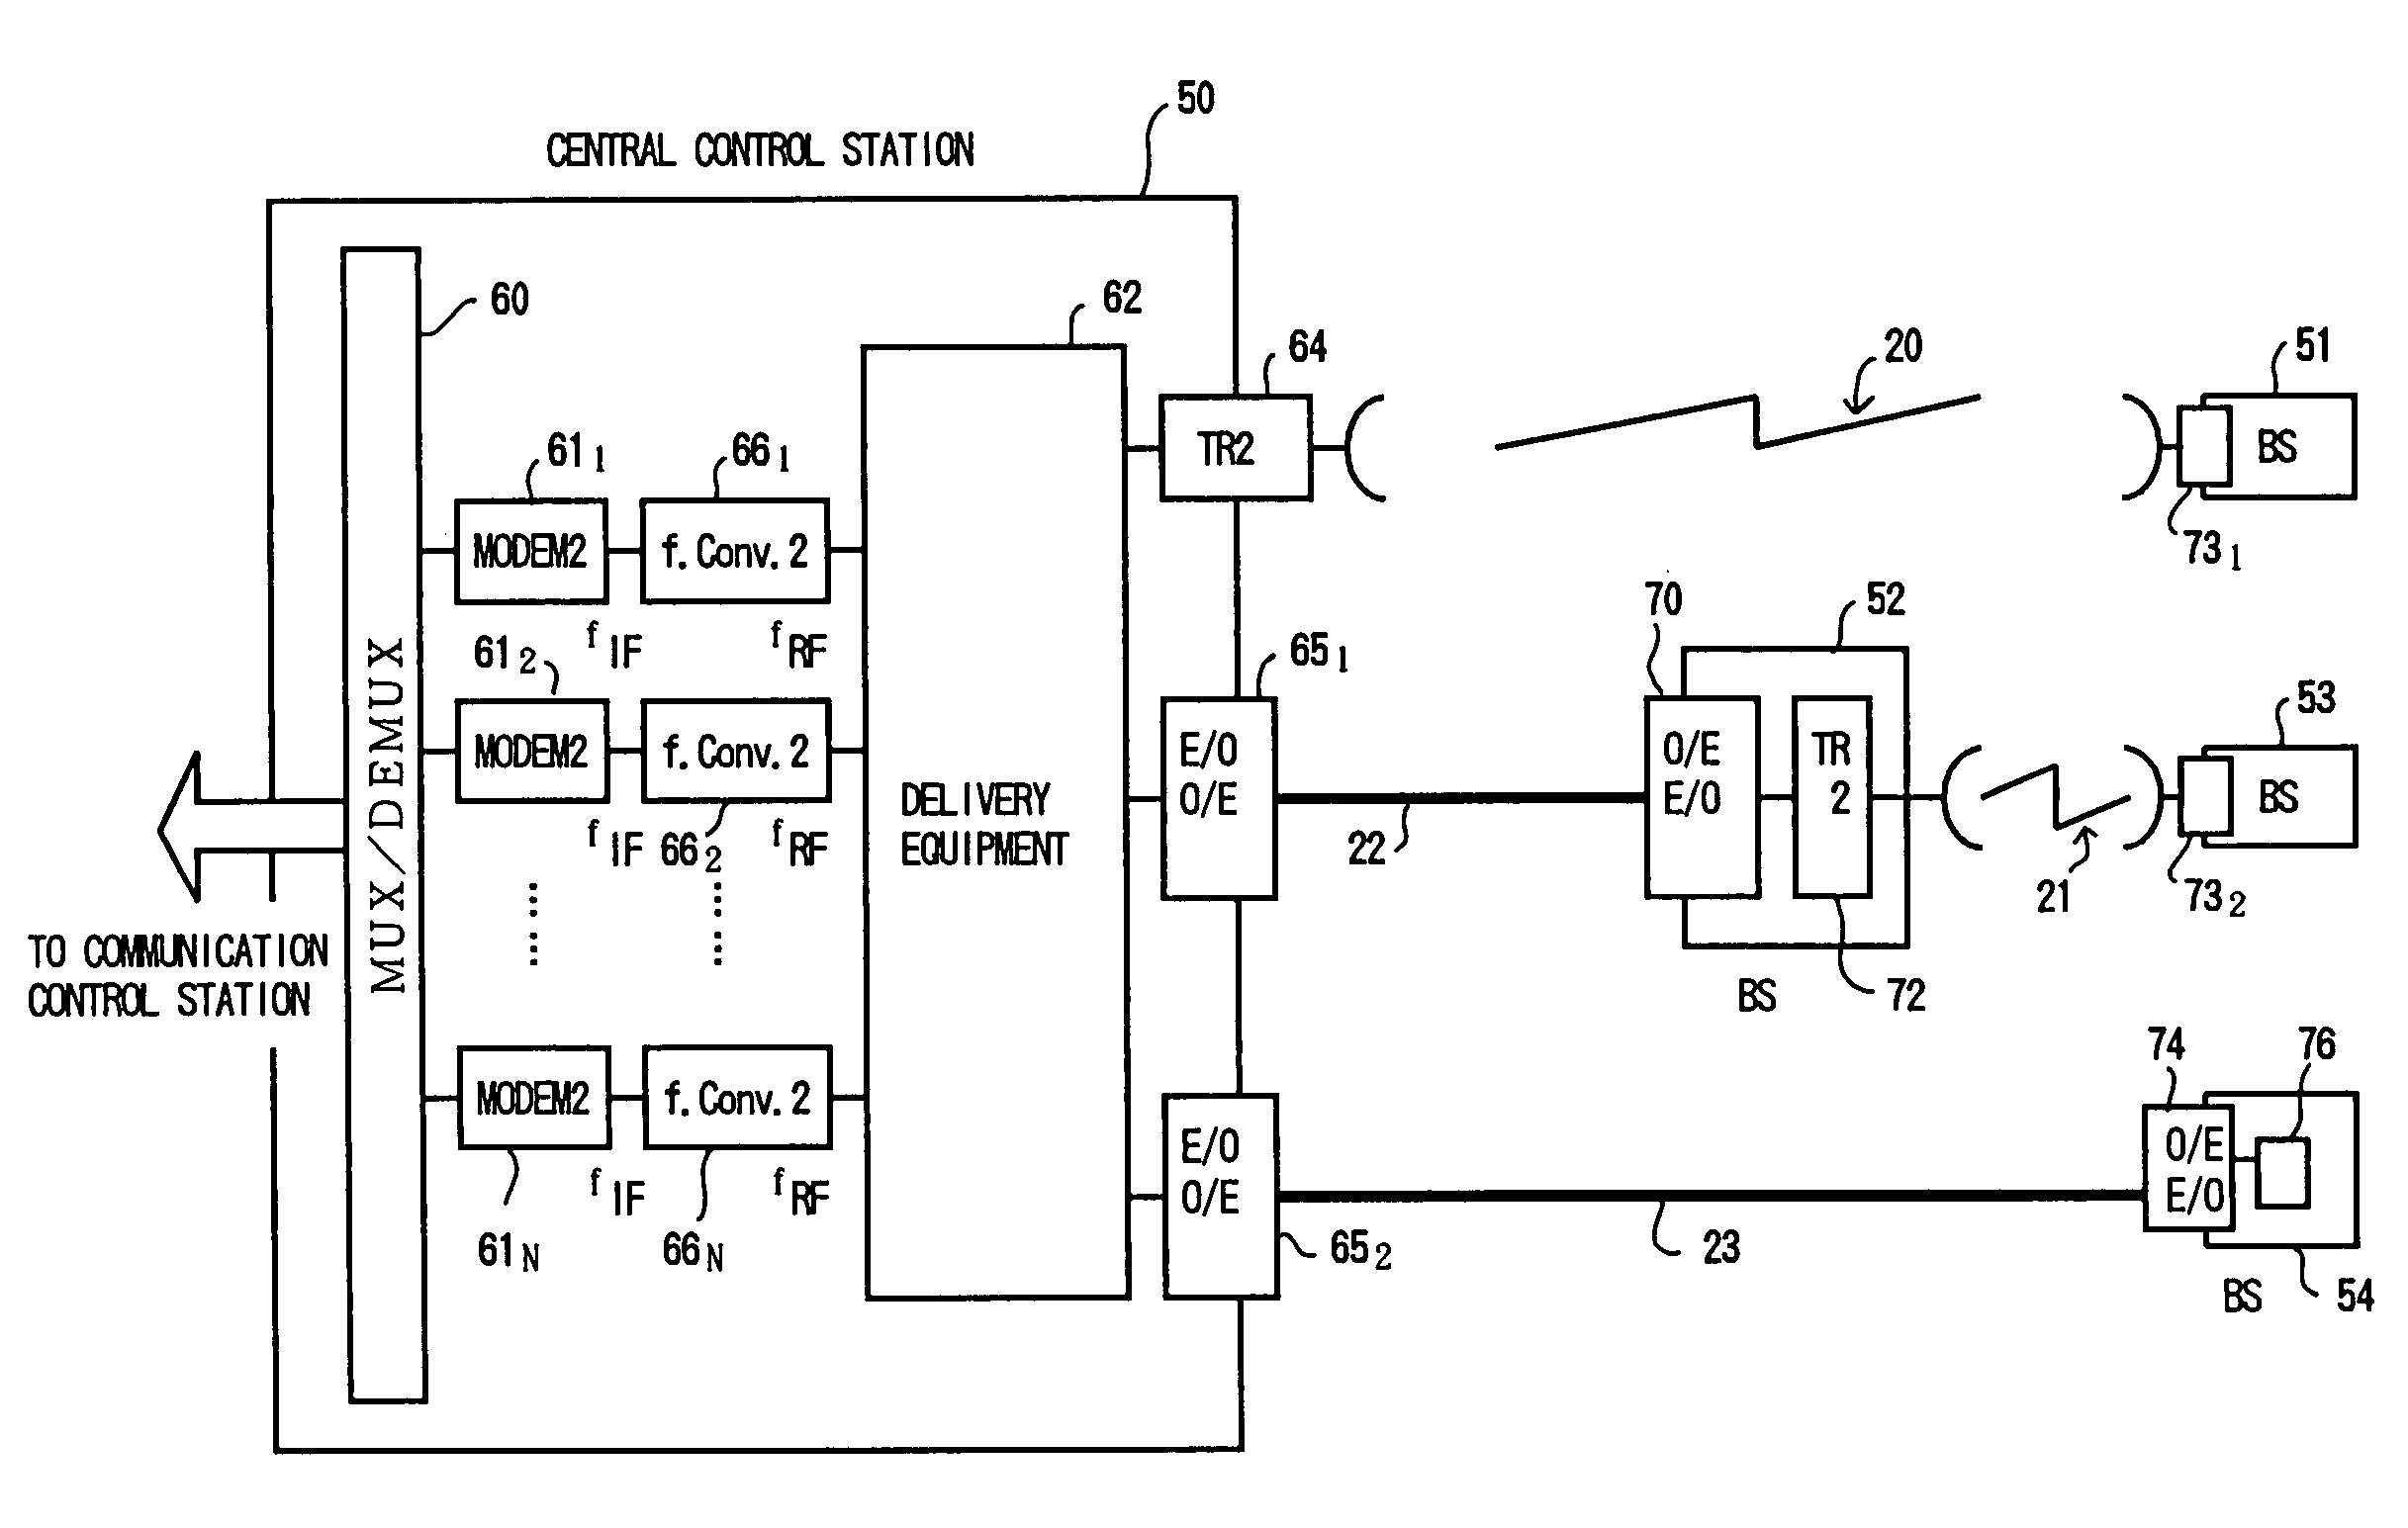 Radio base station system and central control station with unified transmission format